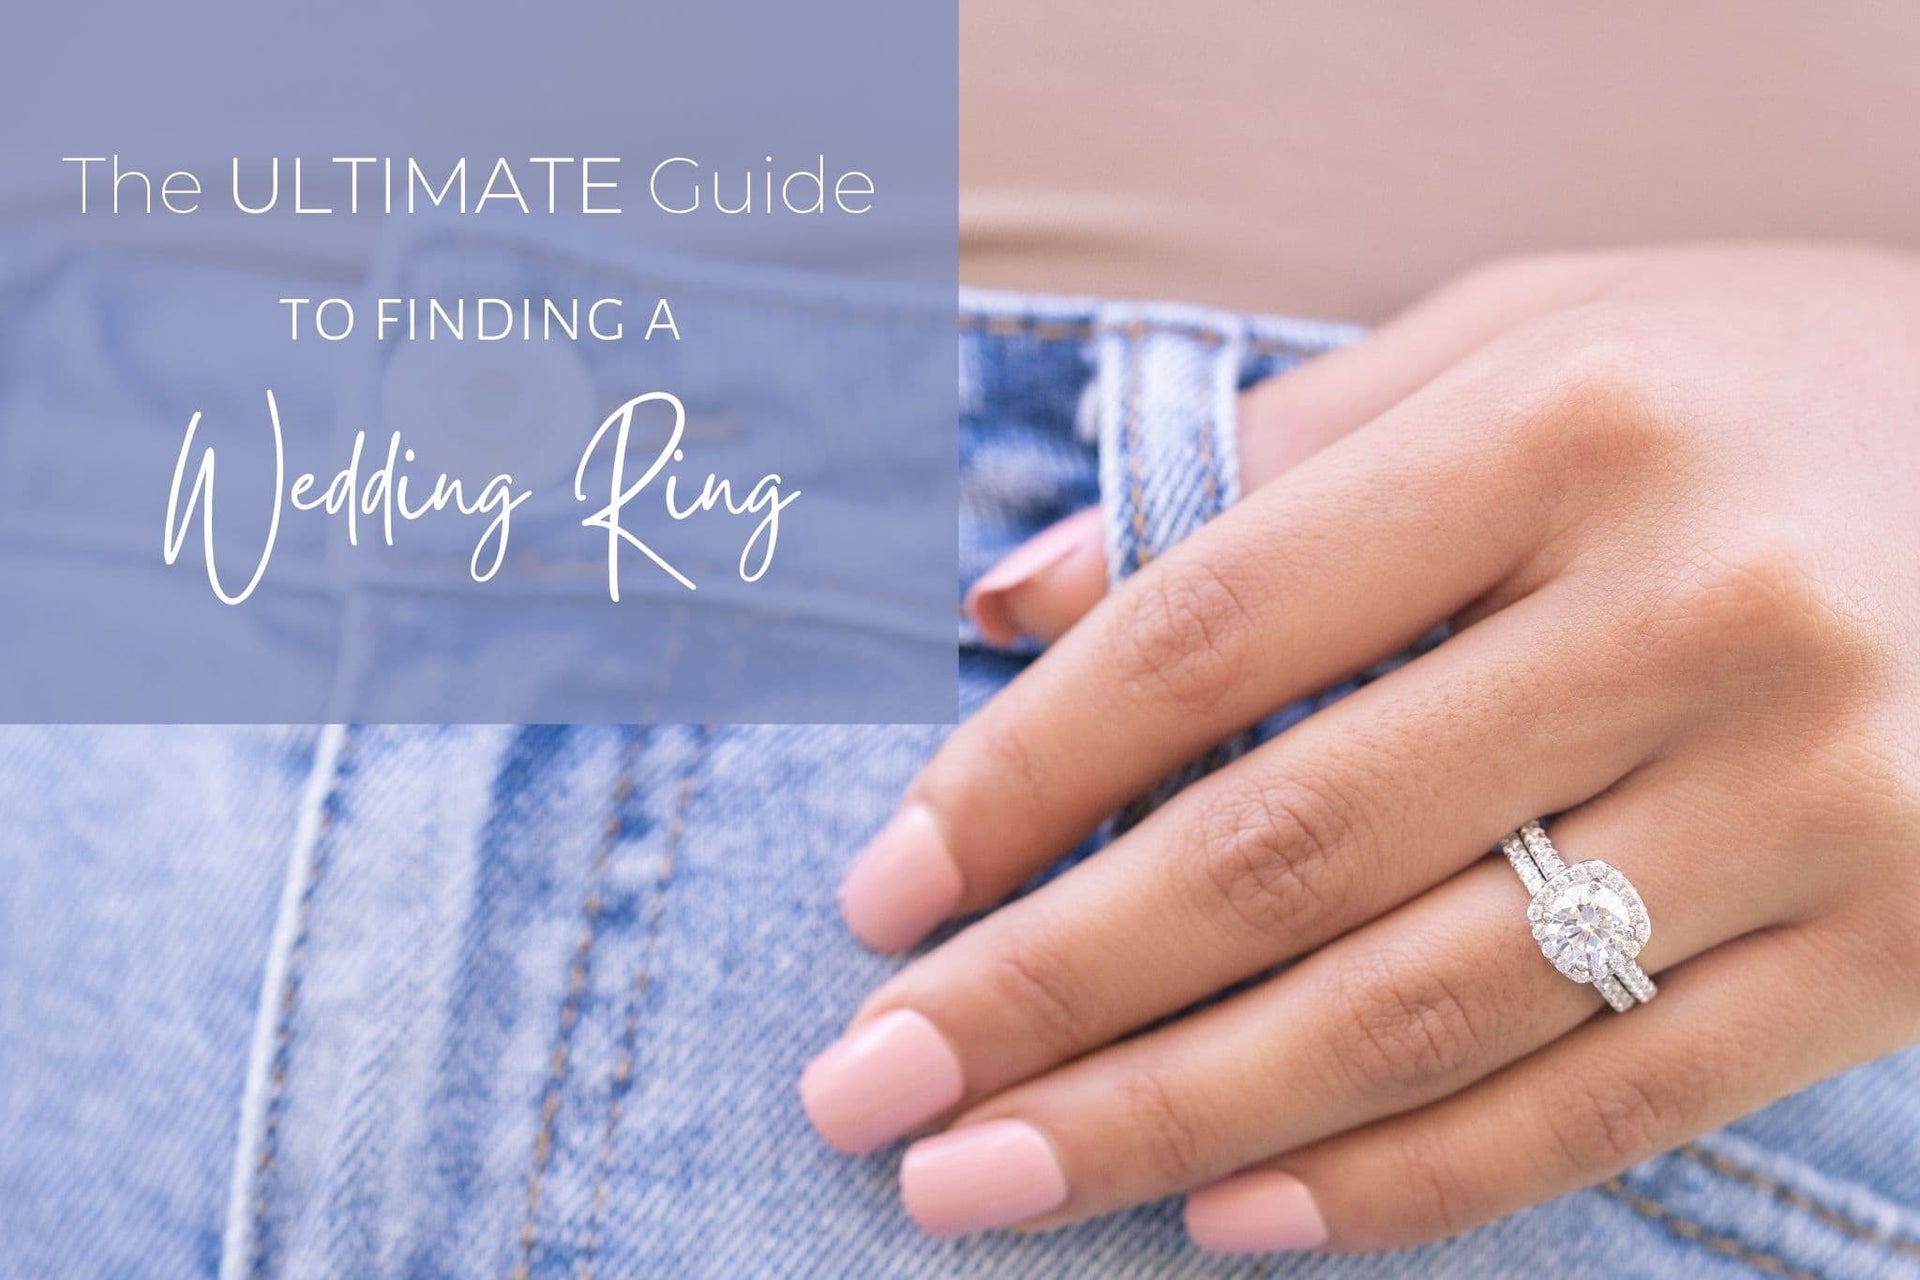 The ULTIMATE Guide to Finding a Wedding Ring